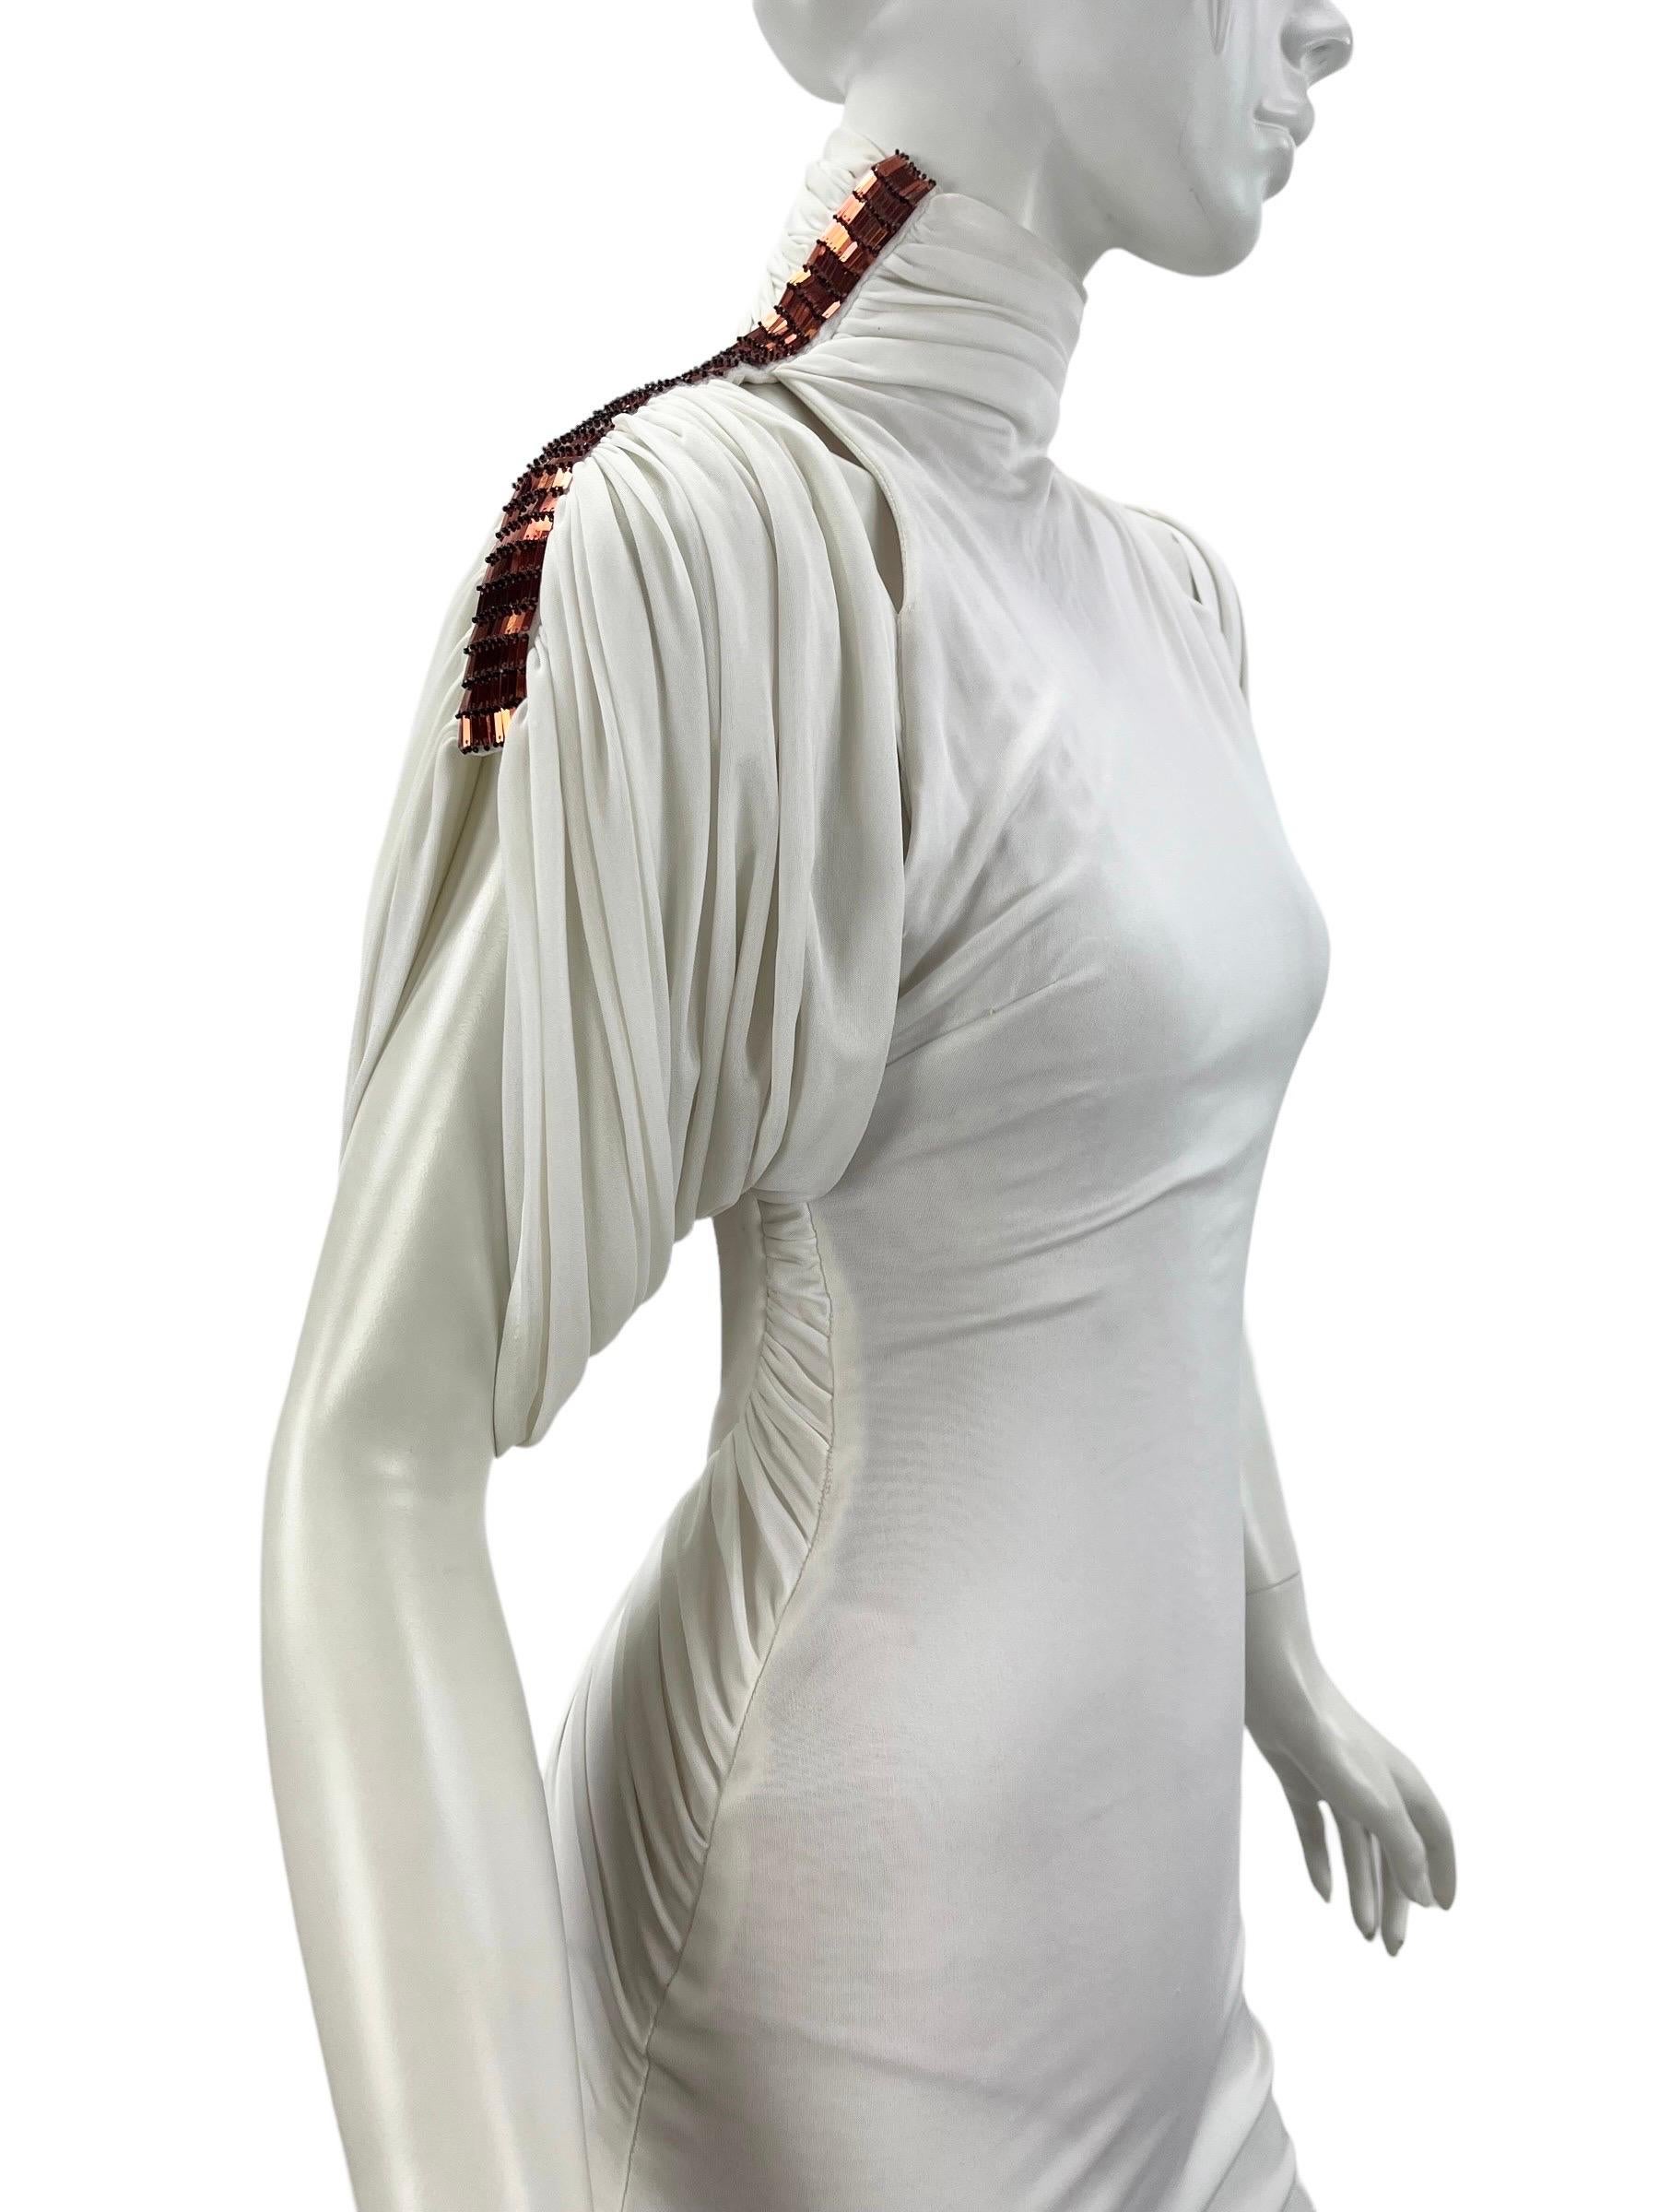 S/S 2001 Vintage Gianni Versace Couture Embellished White Turtleneck Dress It 38 For Sale 1